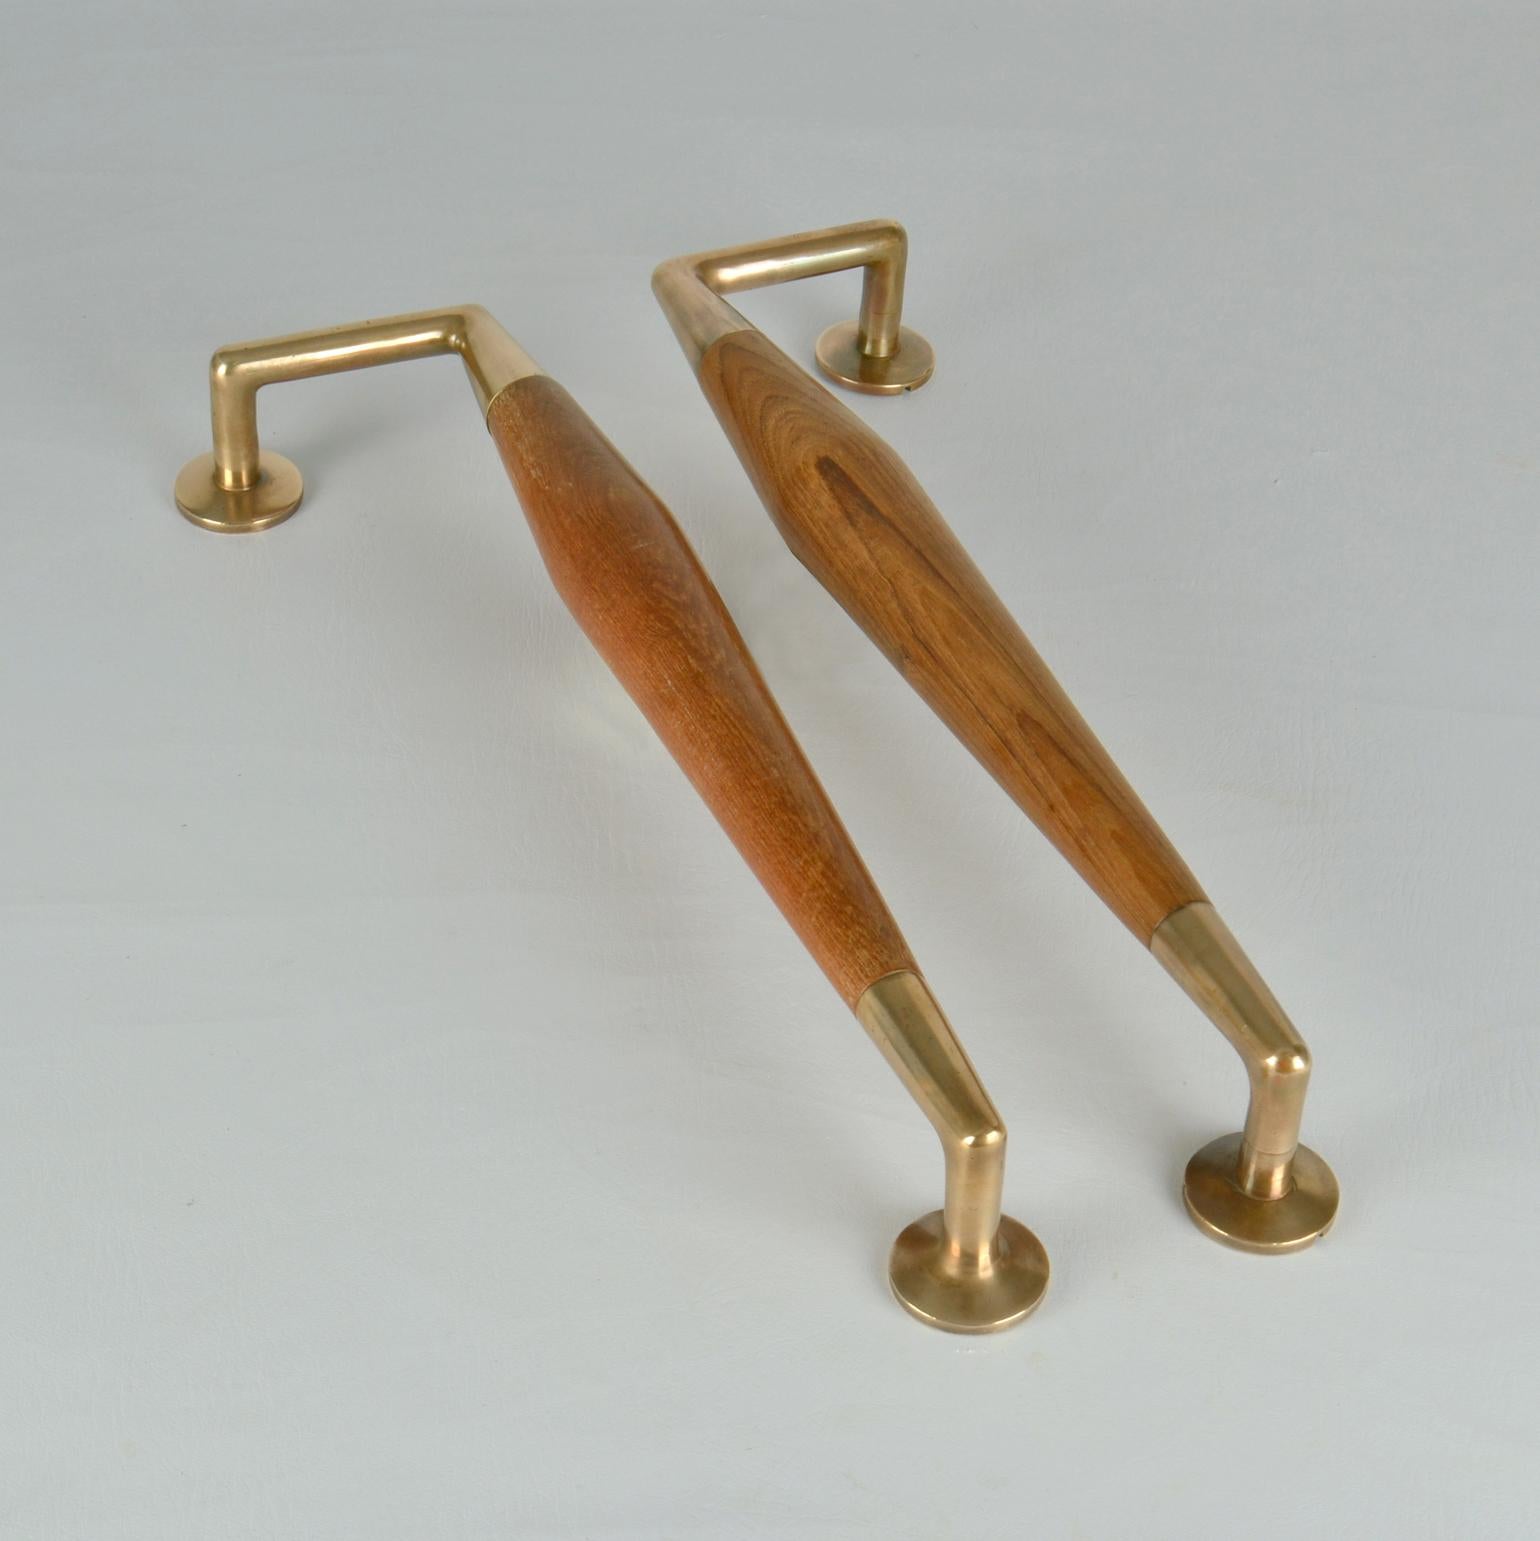 Pair of 1950's push and pull pool ‘L’ shaped door handles are made from cast copper mounts and stained in beech wood. The wooden hand grips are lathed forming the pair into elongated diamond cones. The materials are monochromatic and neutral, with